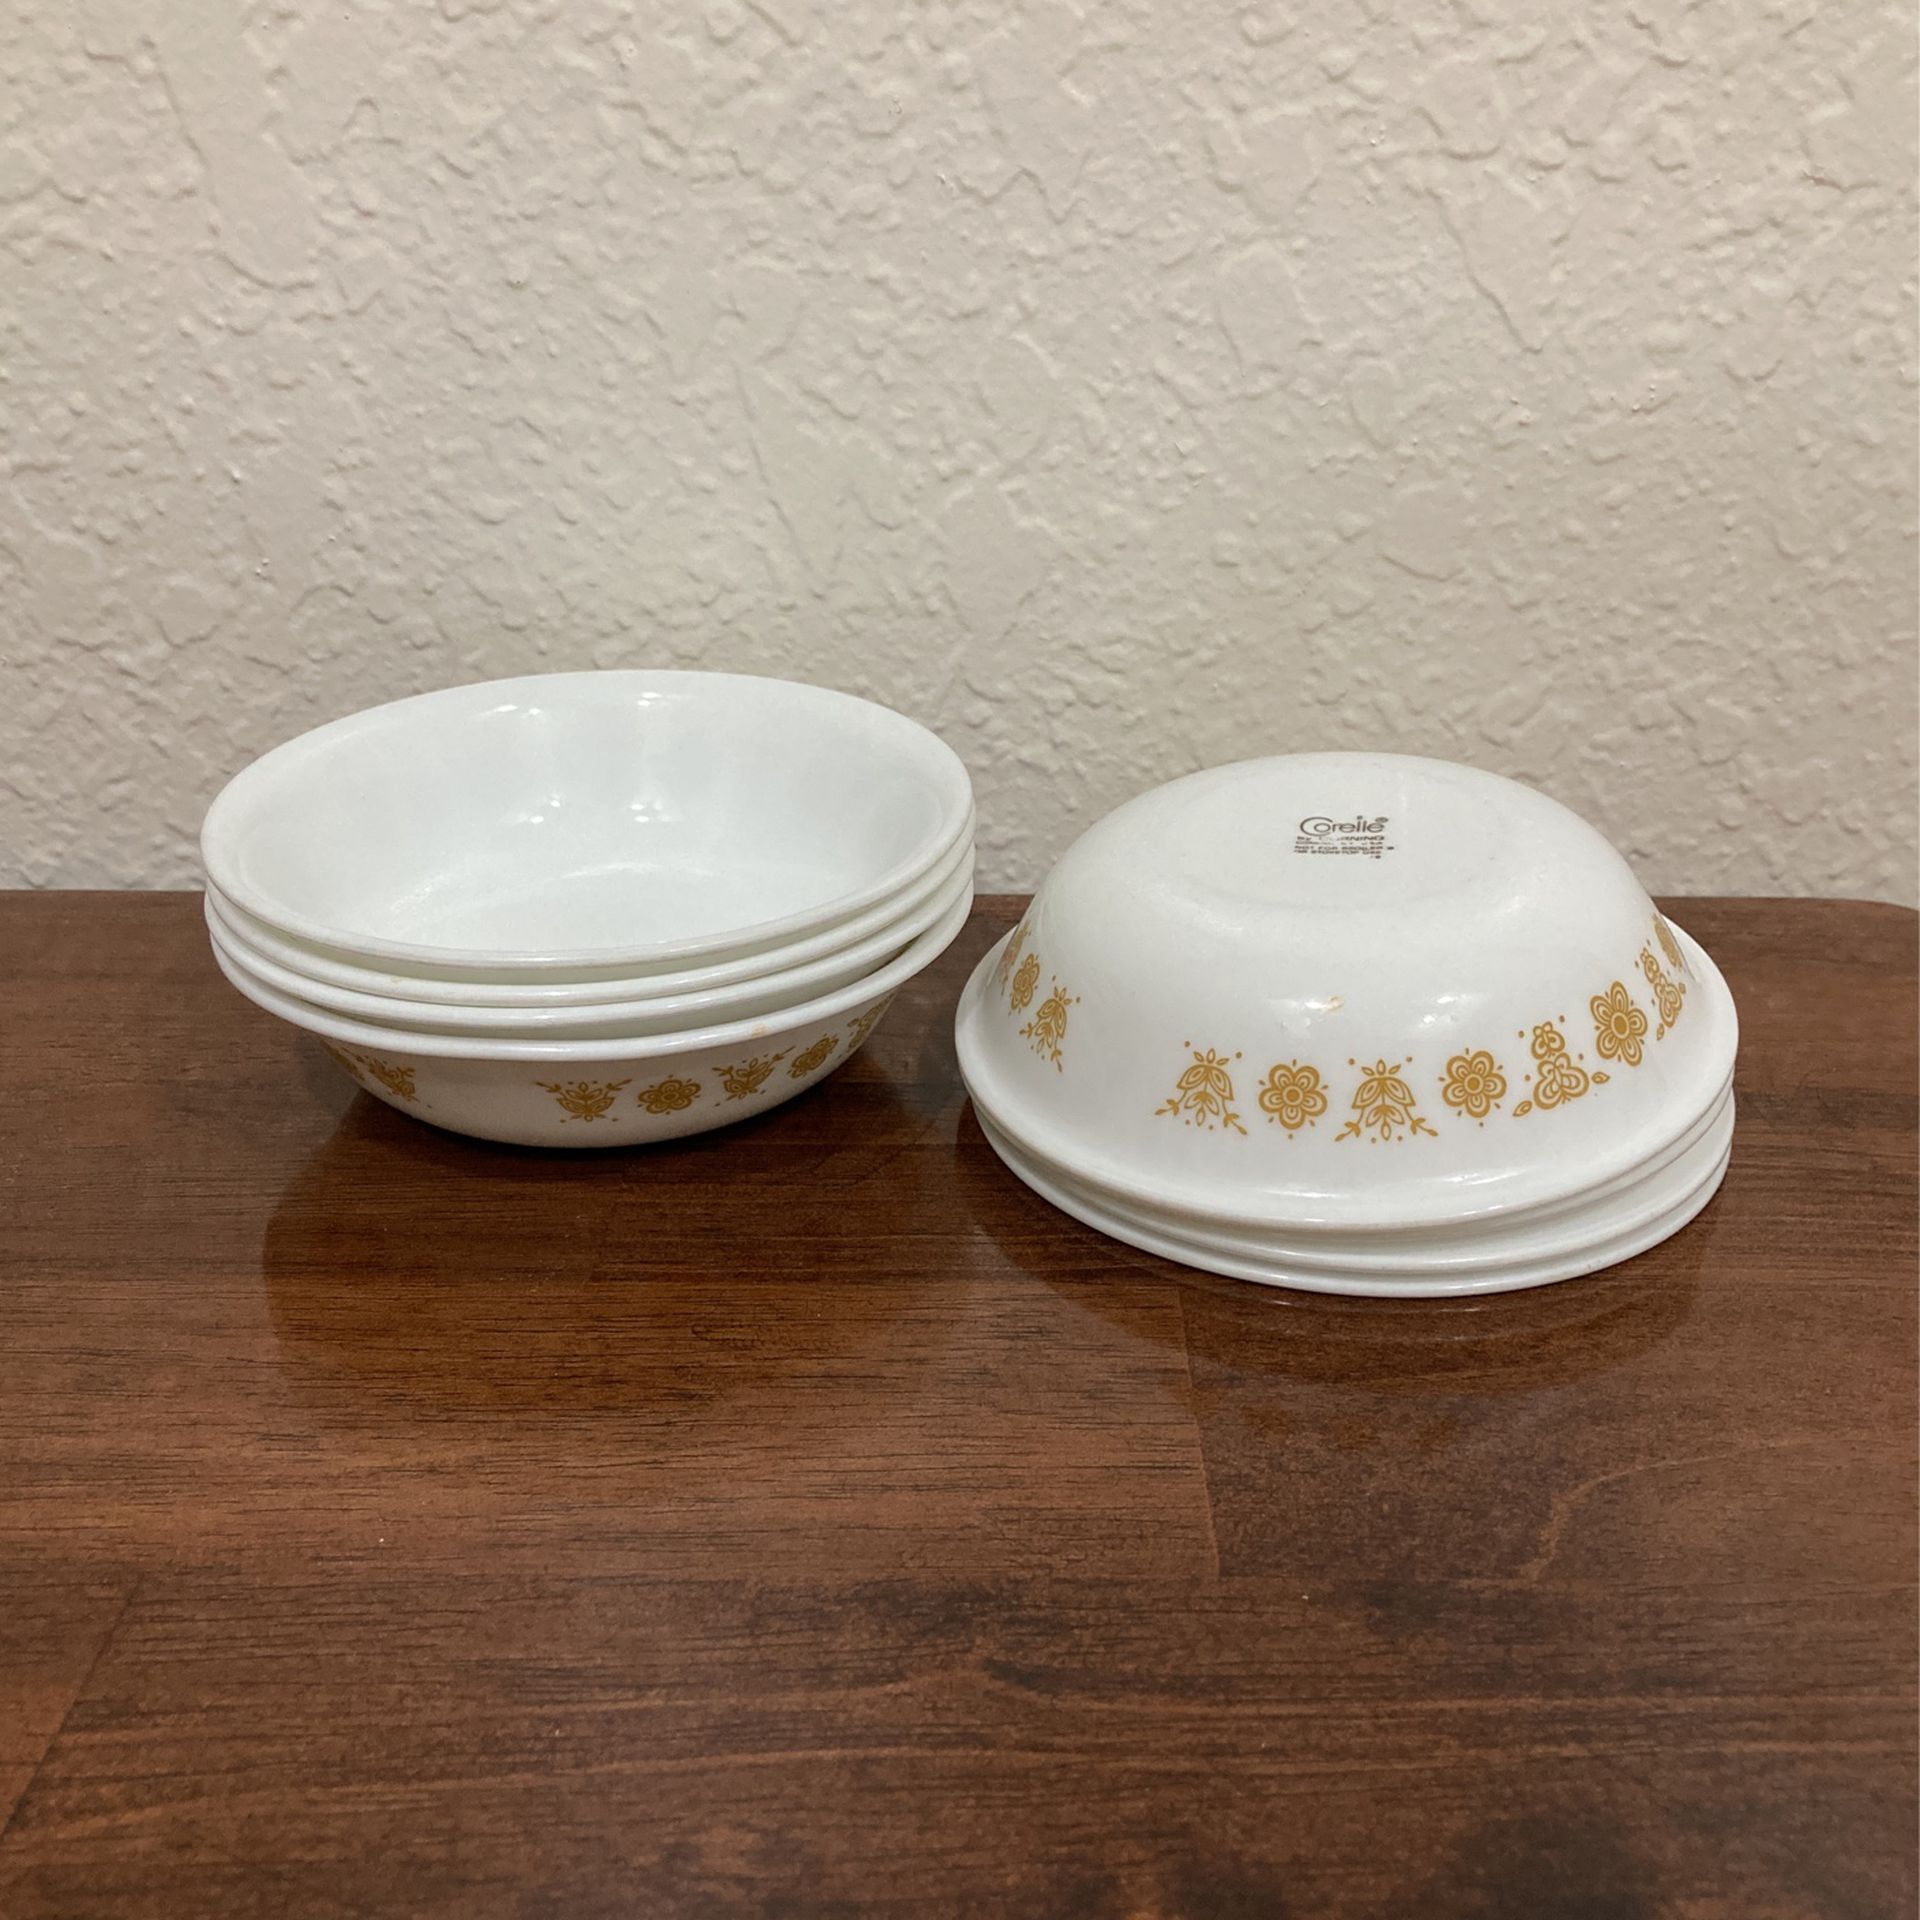 VINTAGE CORELLE BUTTERFLY GOLD BERRY BOWLS